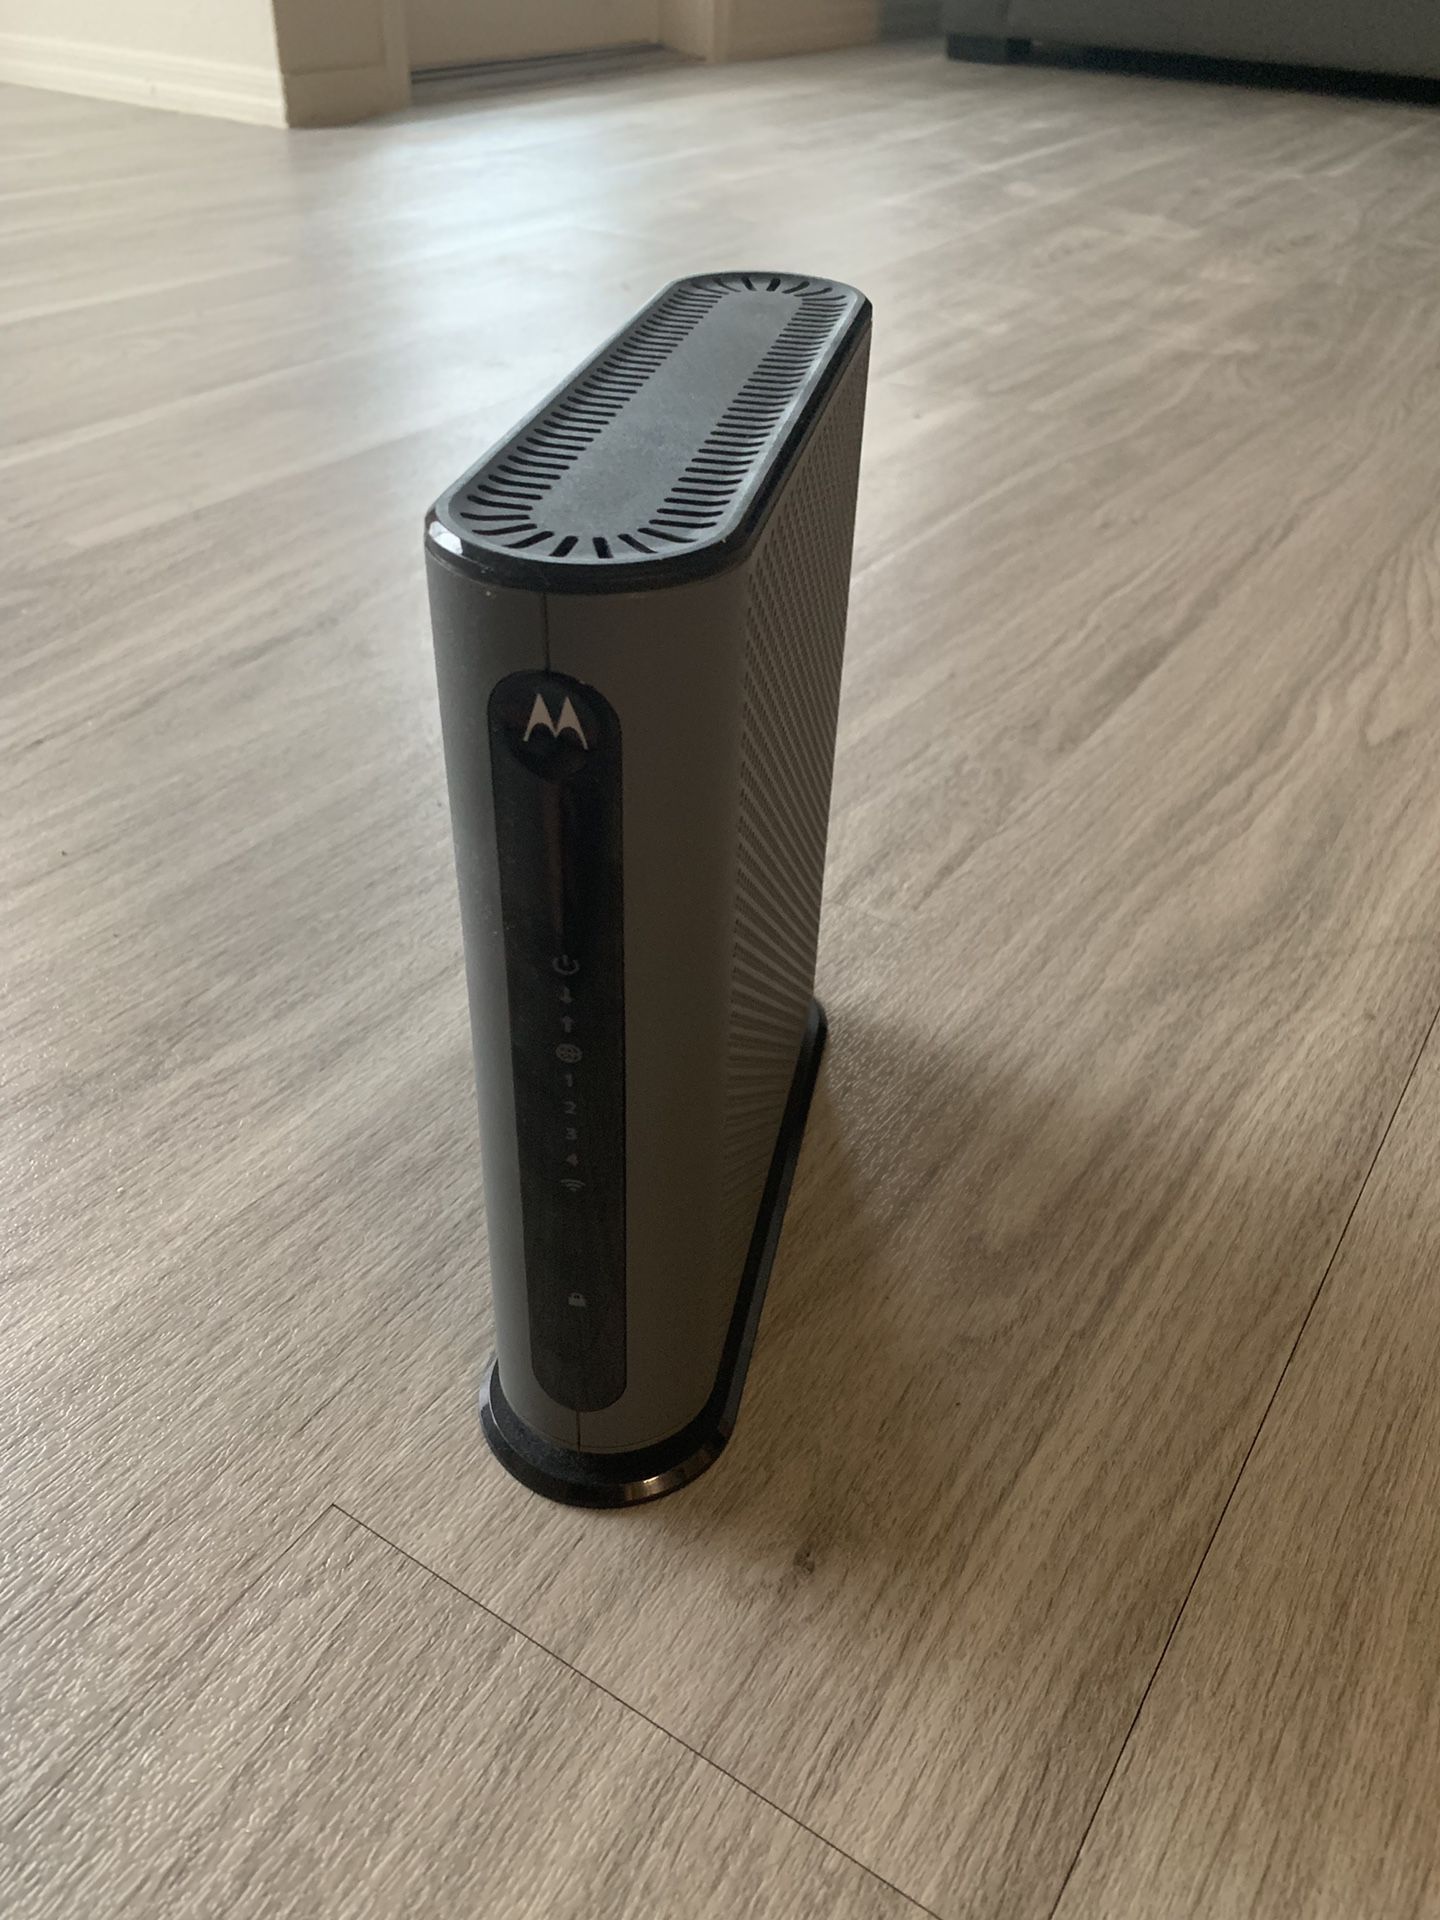 Motorola Cable Modem (works with Cox internet)